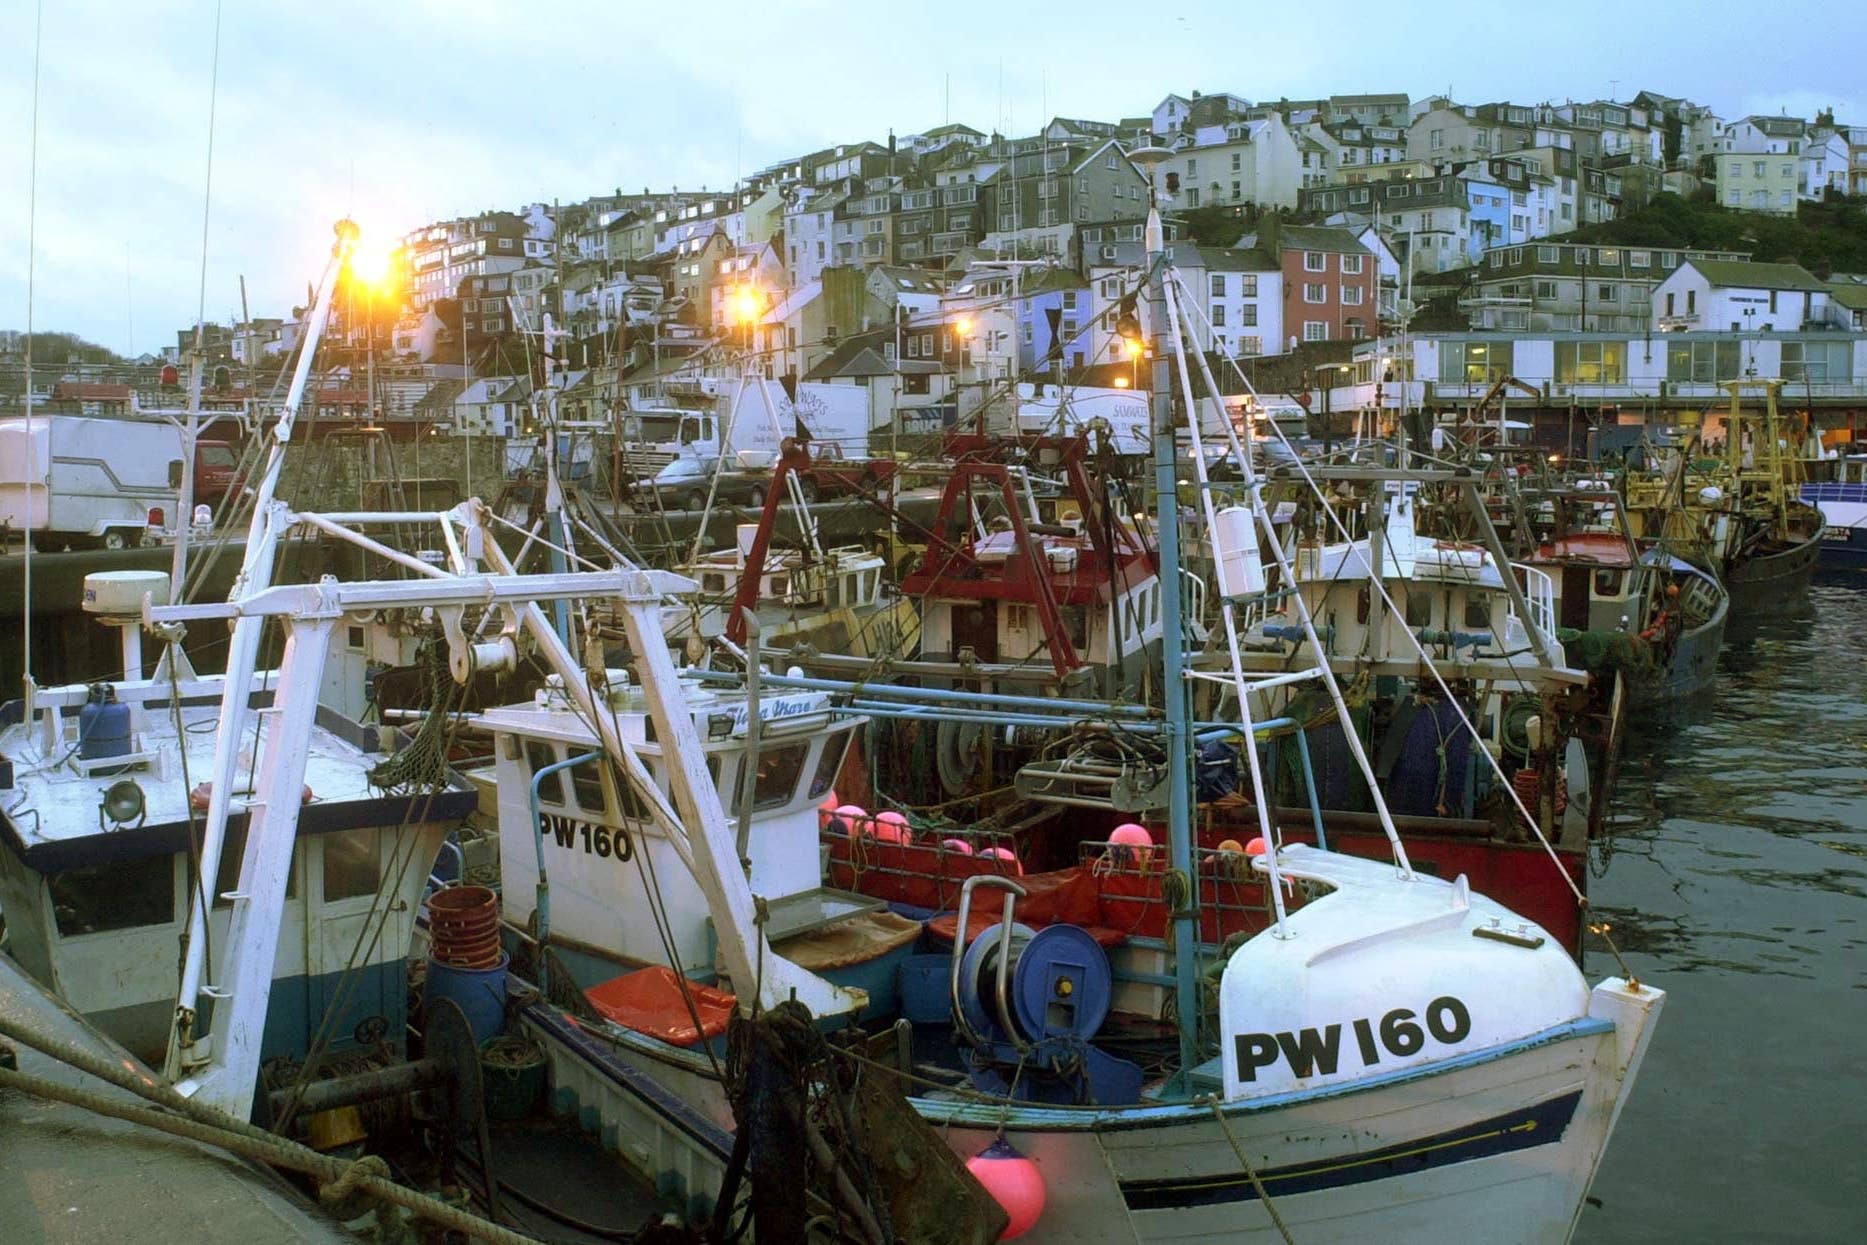 Brixham the main area affected by the outbreak